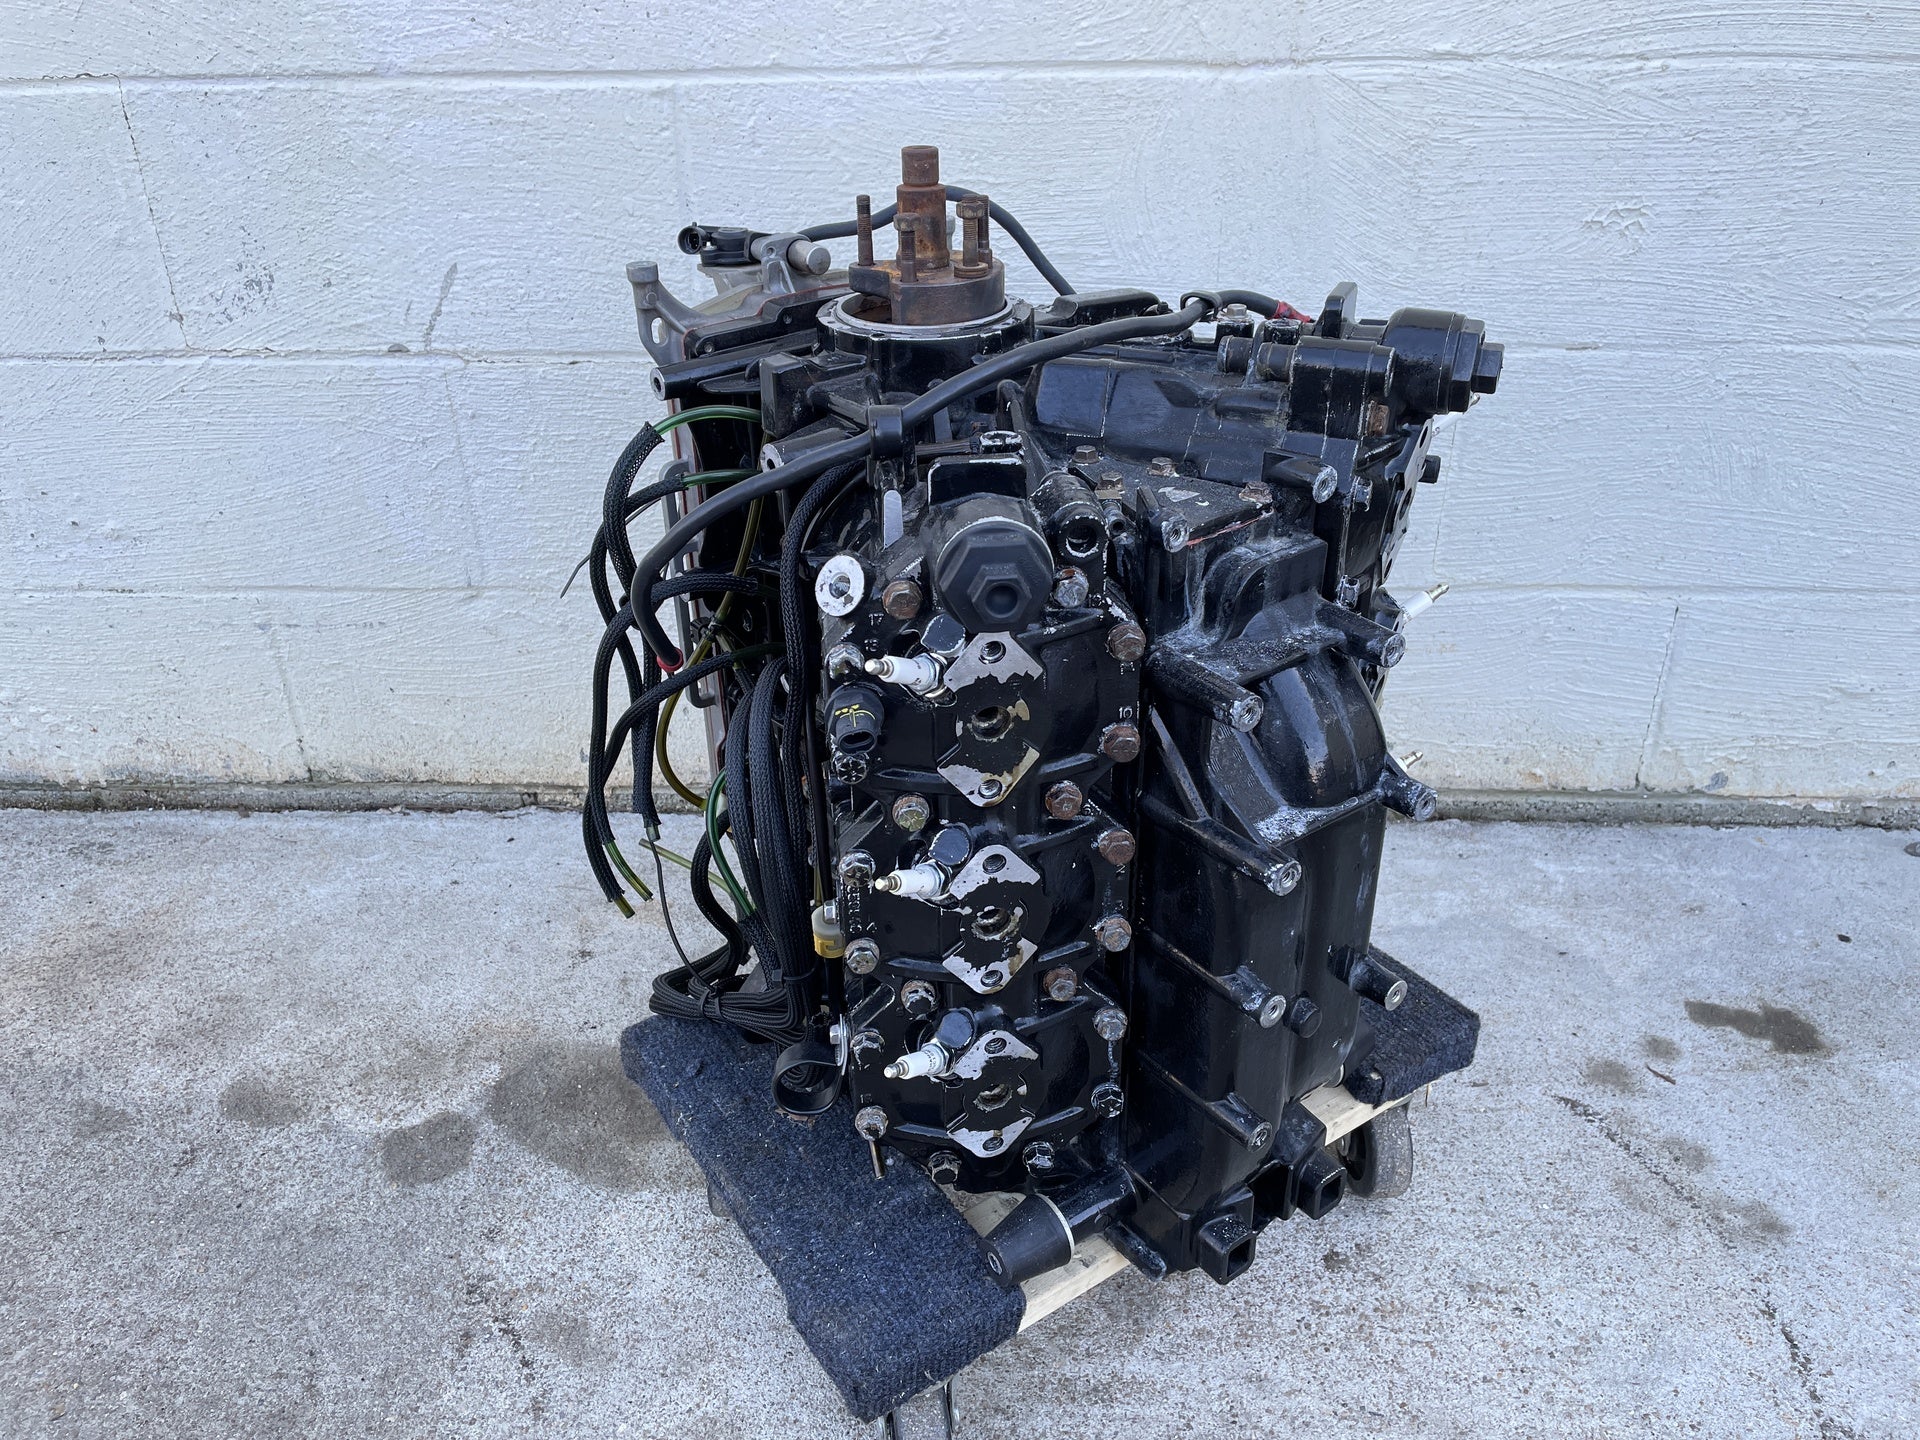 2007 Evinrude 150HP Etec Crankcase Powerhead Assembly - 547 Hours